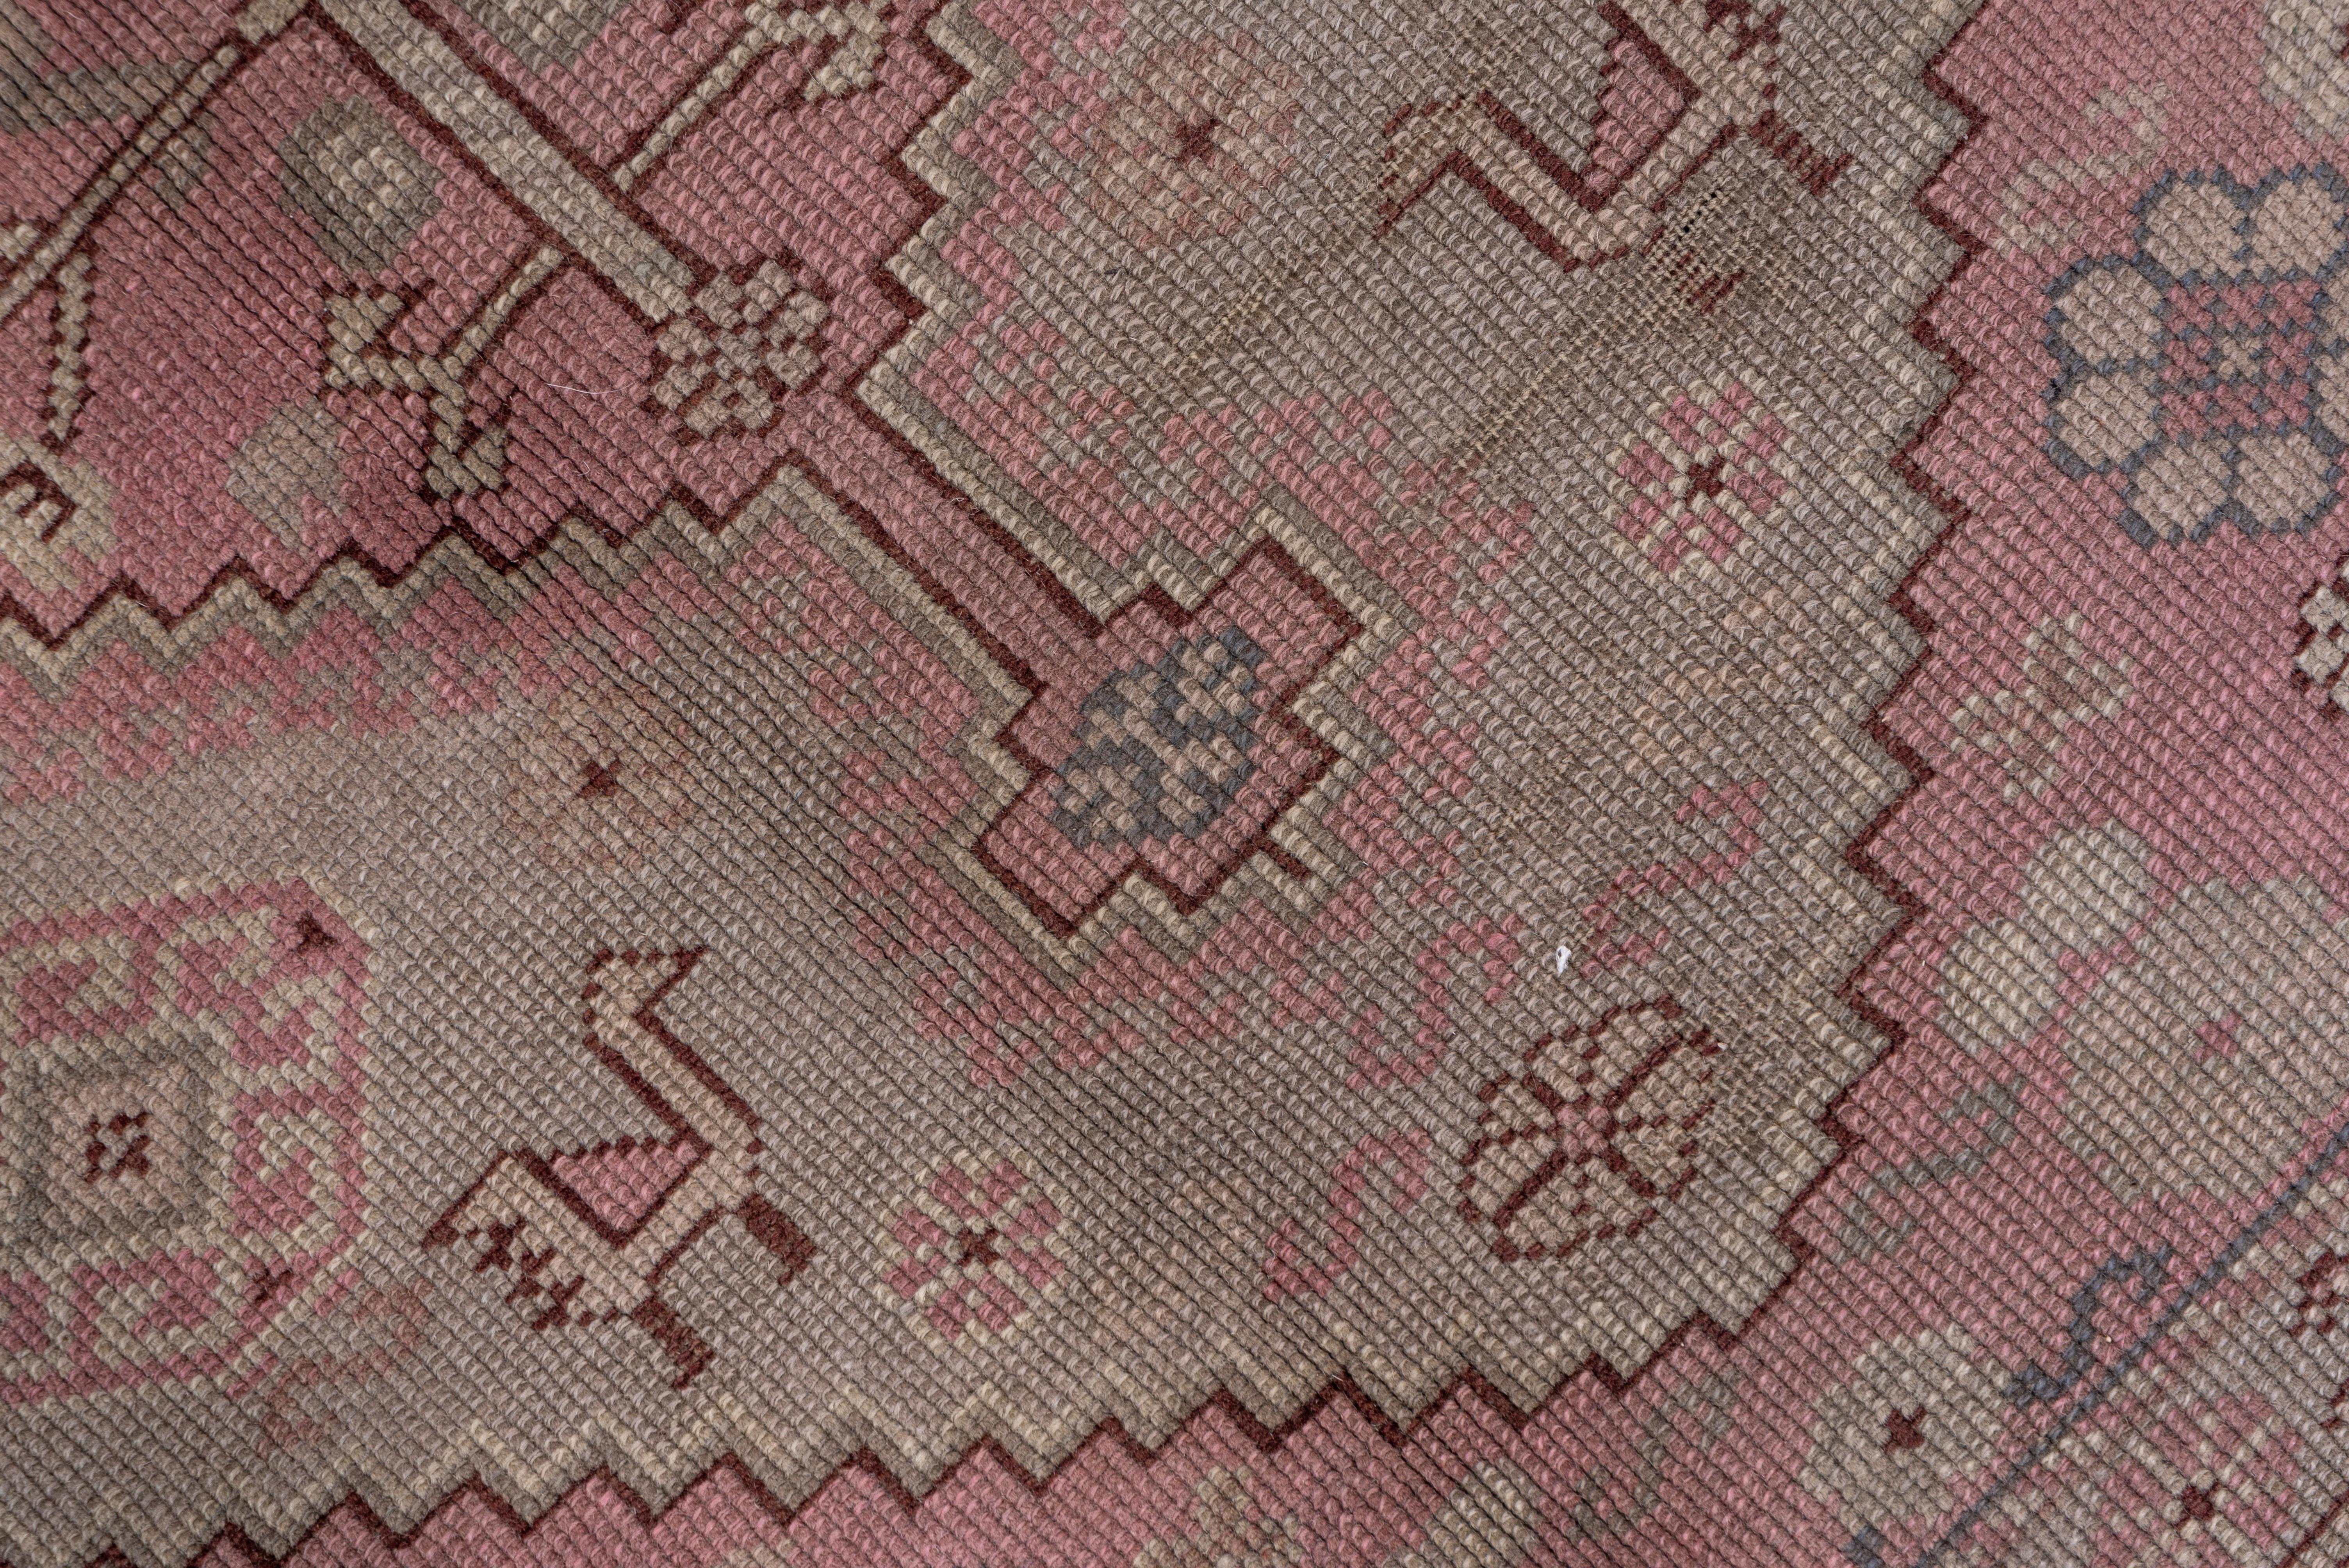 Wool Antique Tribal Turkish Sivas Carpet, Pink and Light Green Field, circa 1920s For Sale